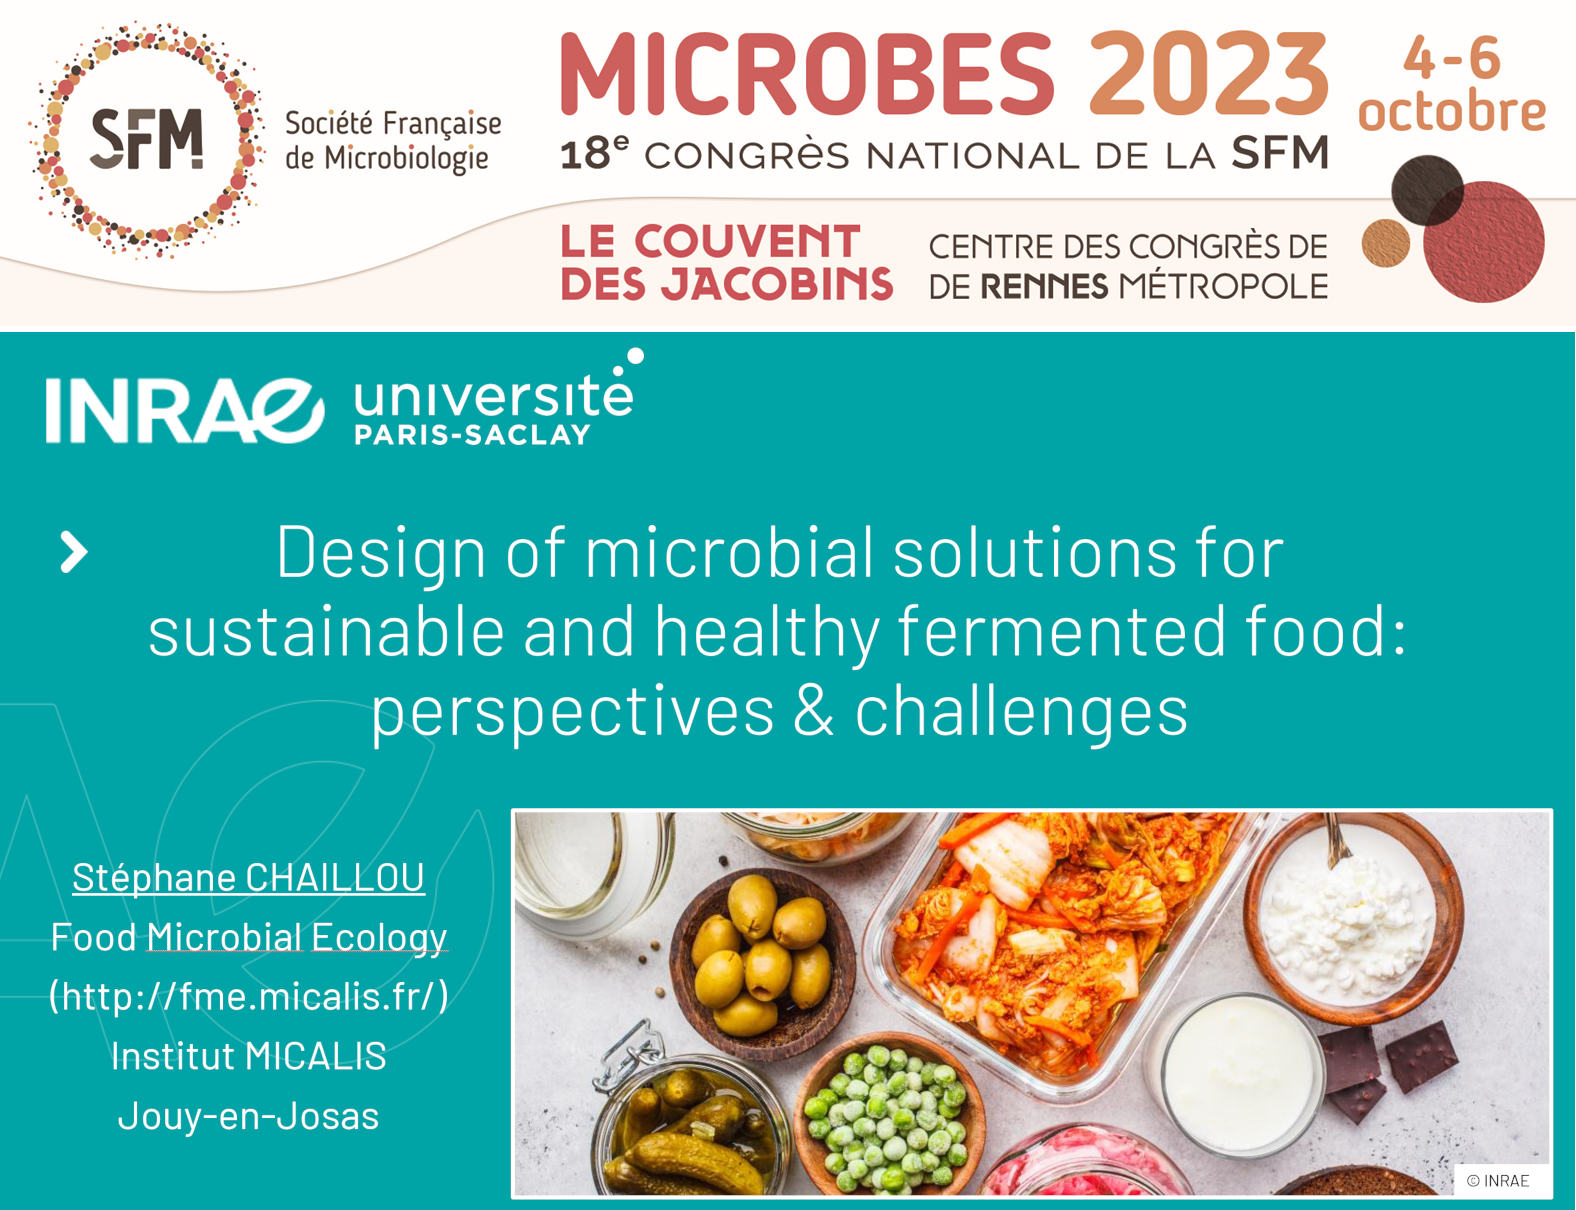 Bringing synthetic Ecology in the field of food microbiology